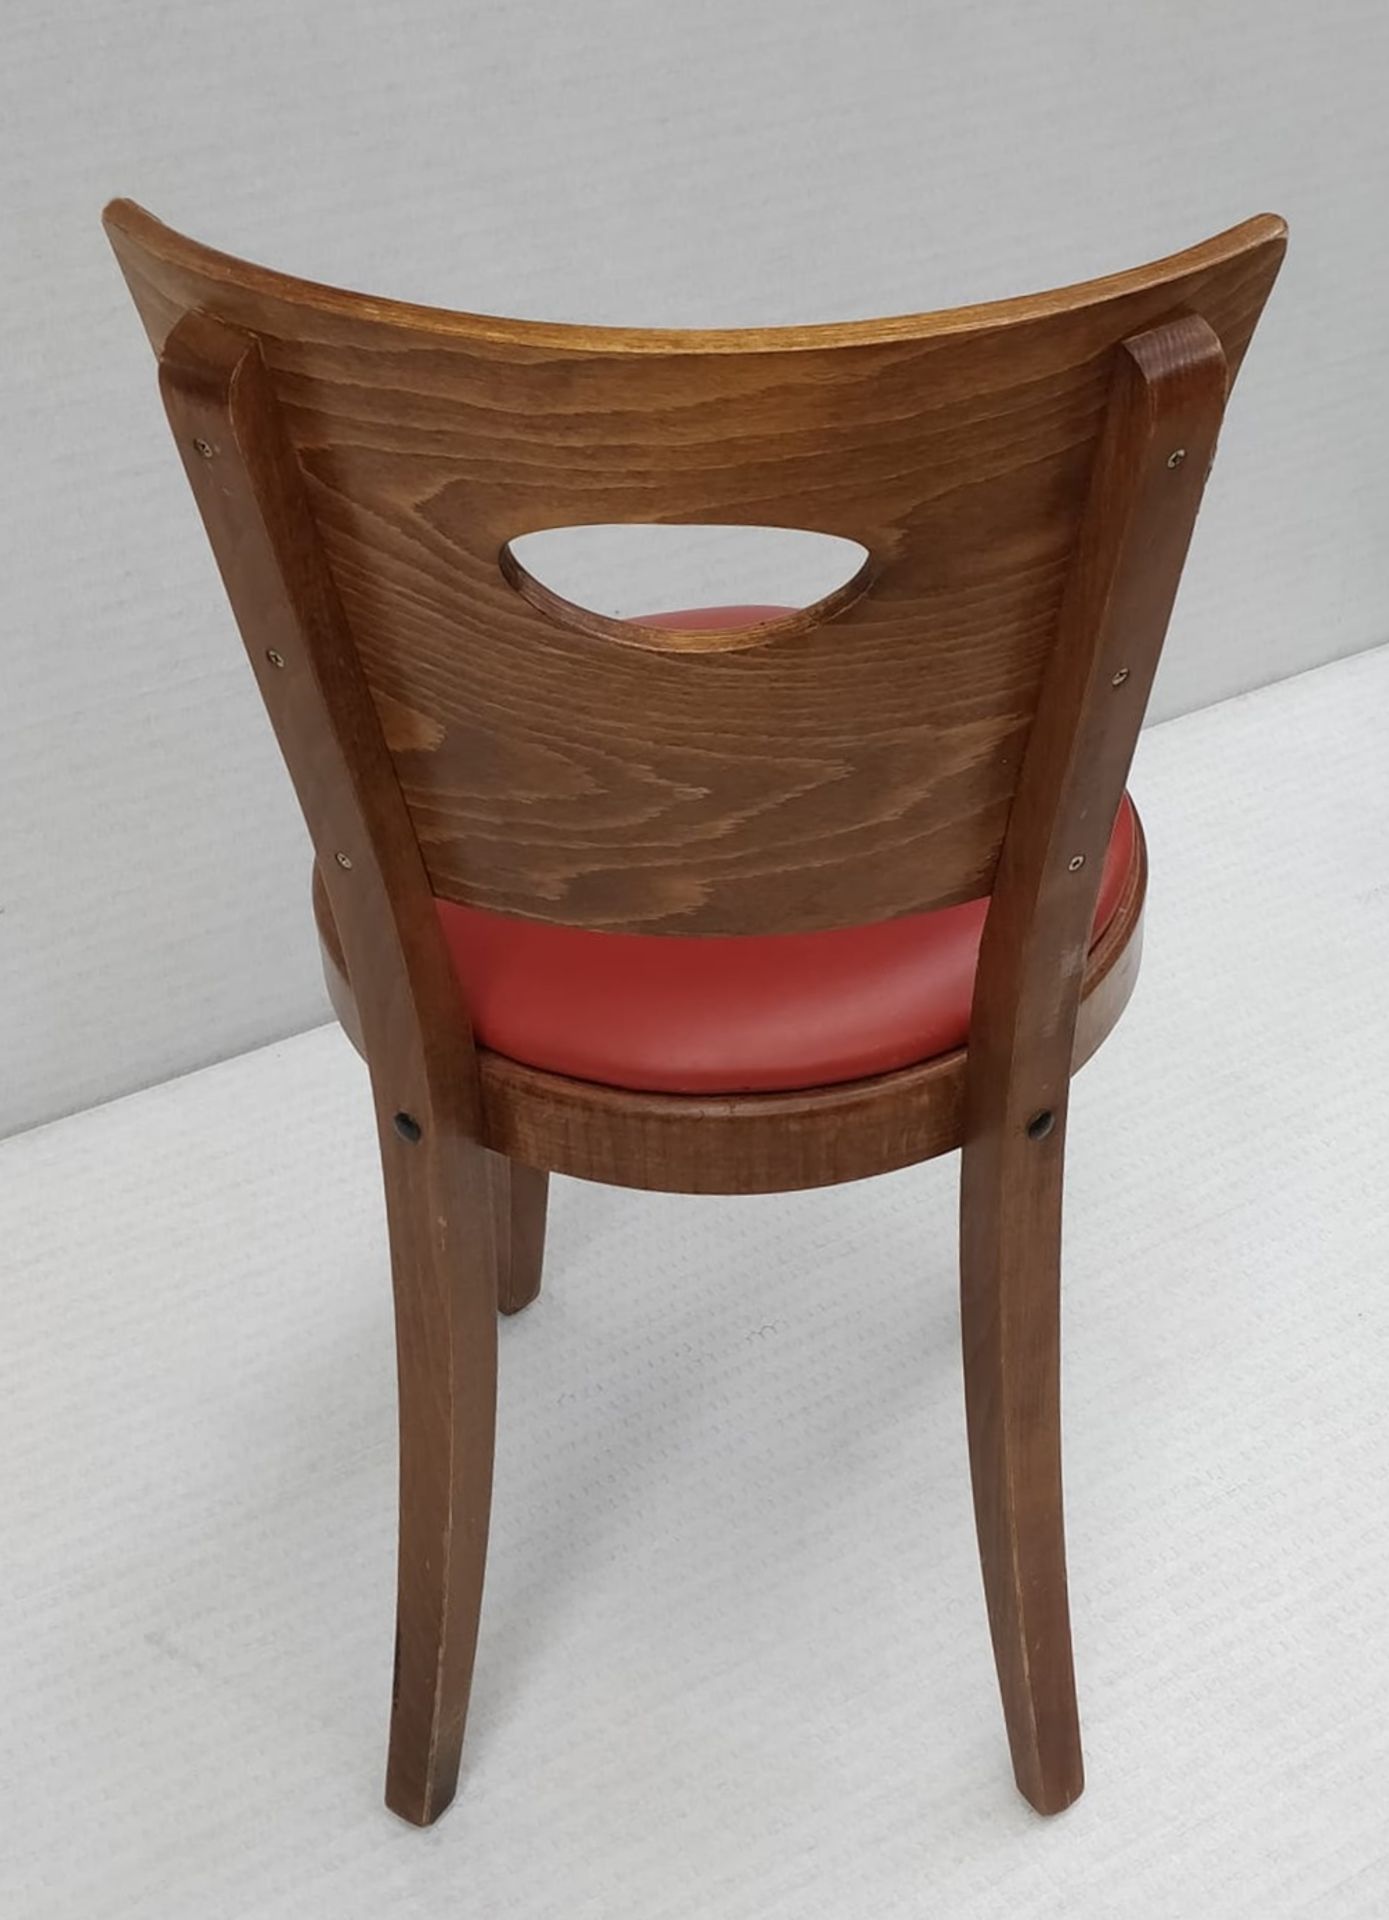 24 x Contemporary Restaurant Dining Chairs With Dark Wood Finish and Red Leather Seat Pads - - Image 2 of 6